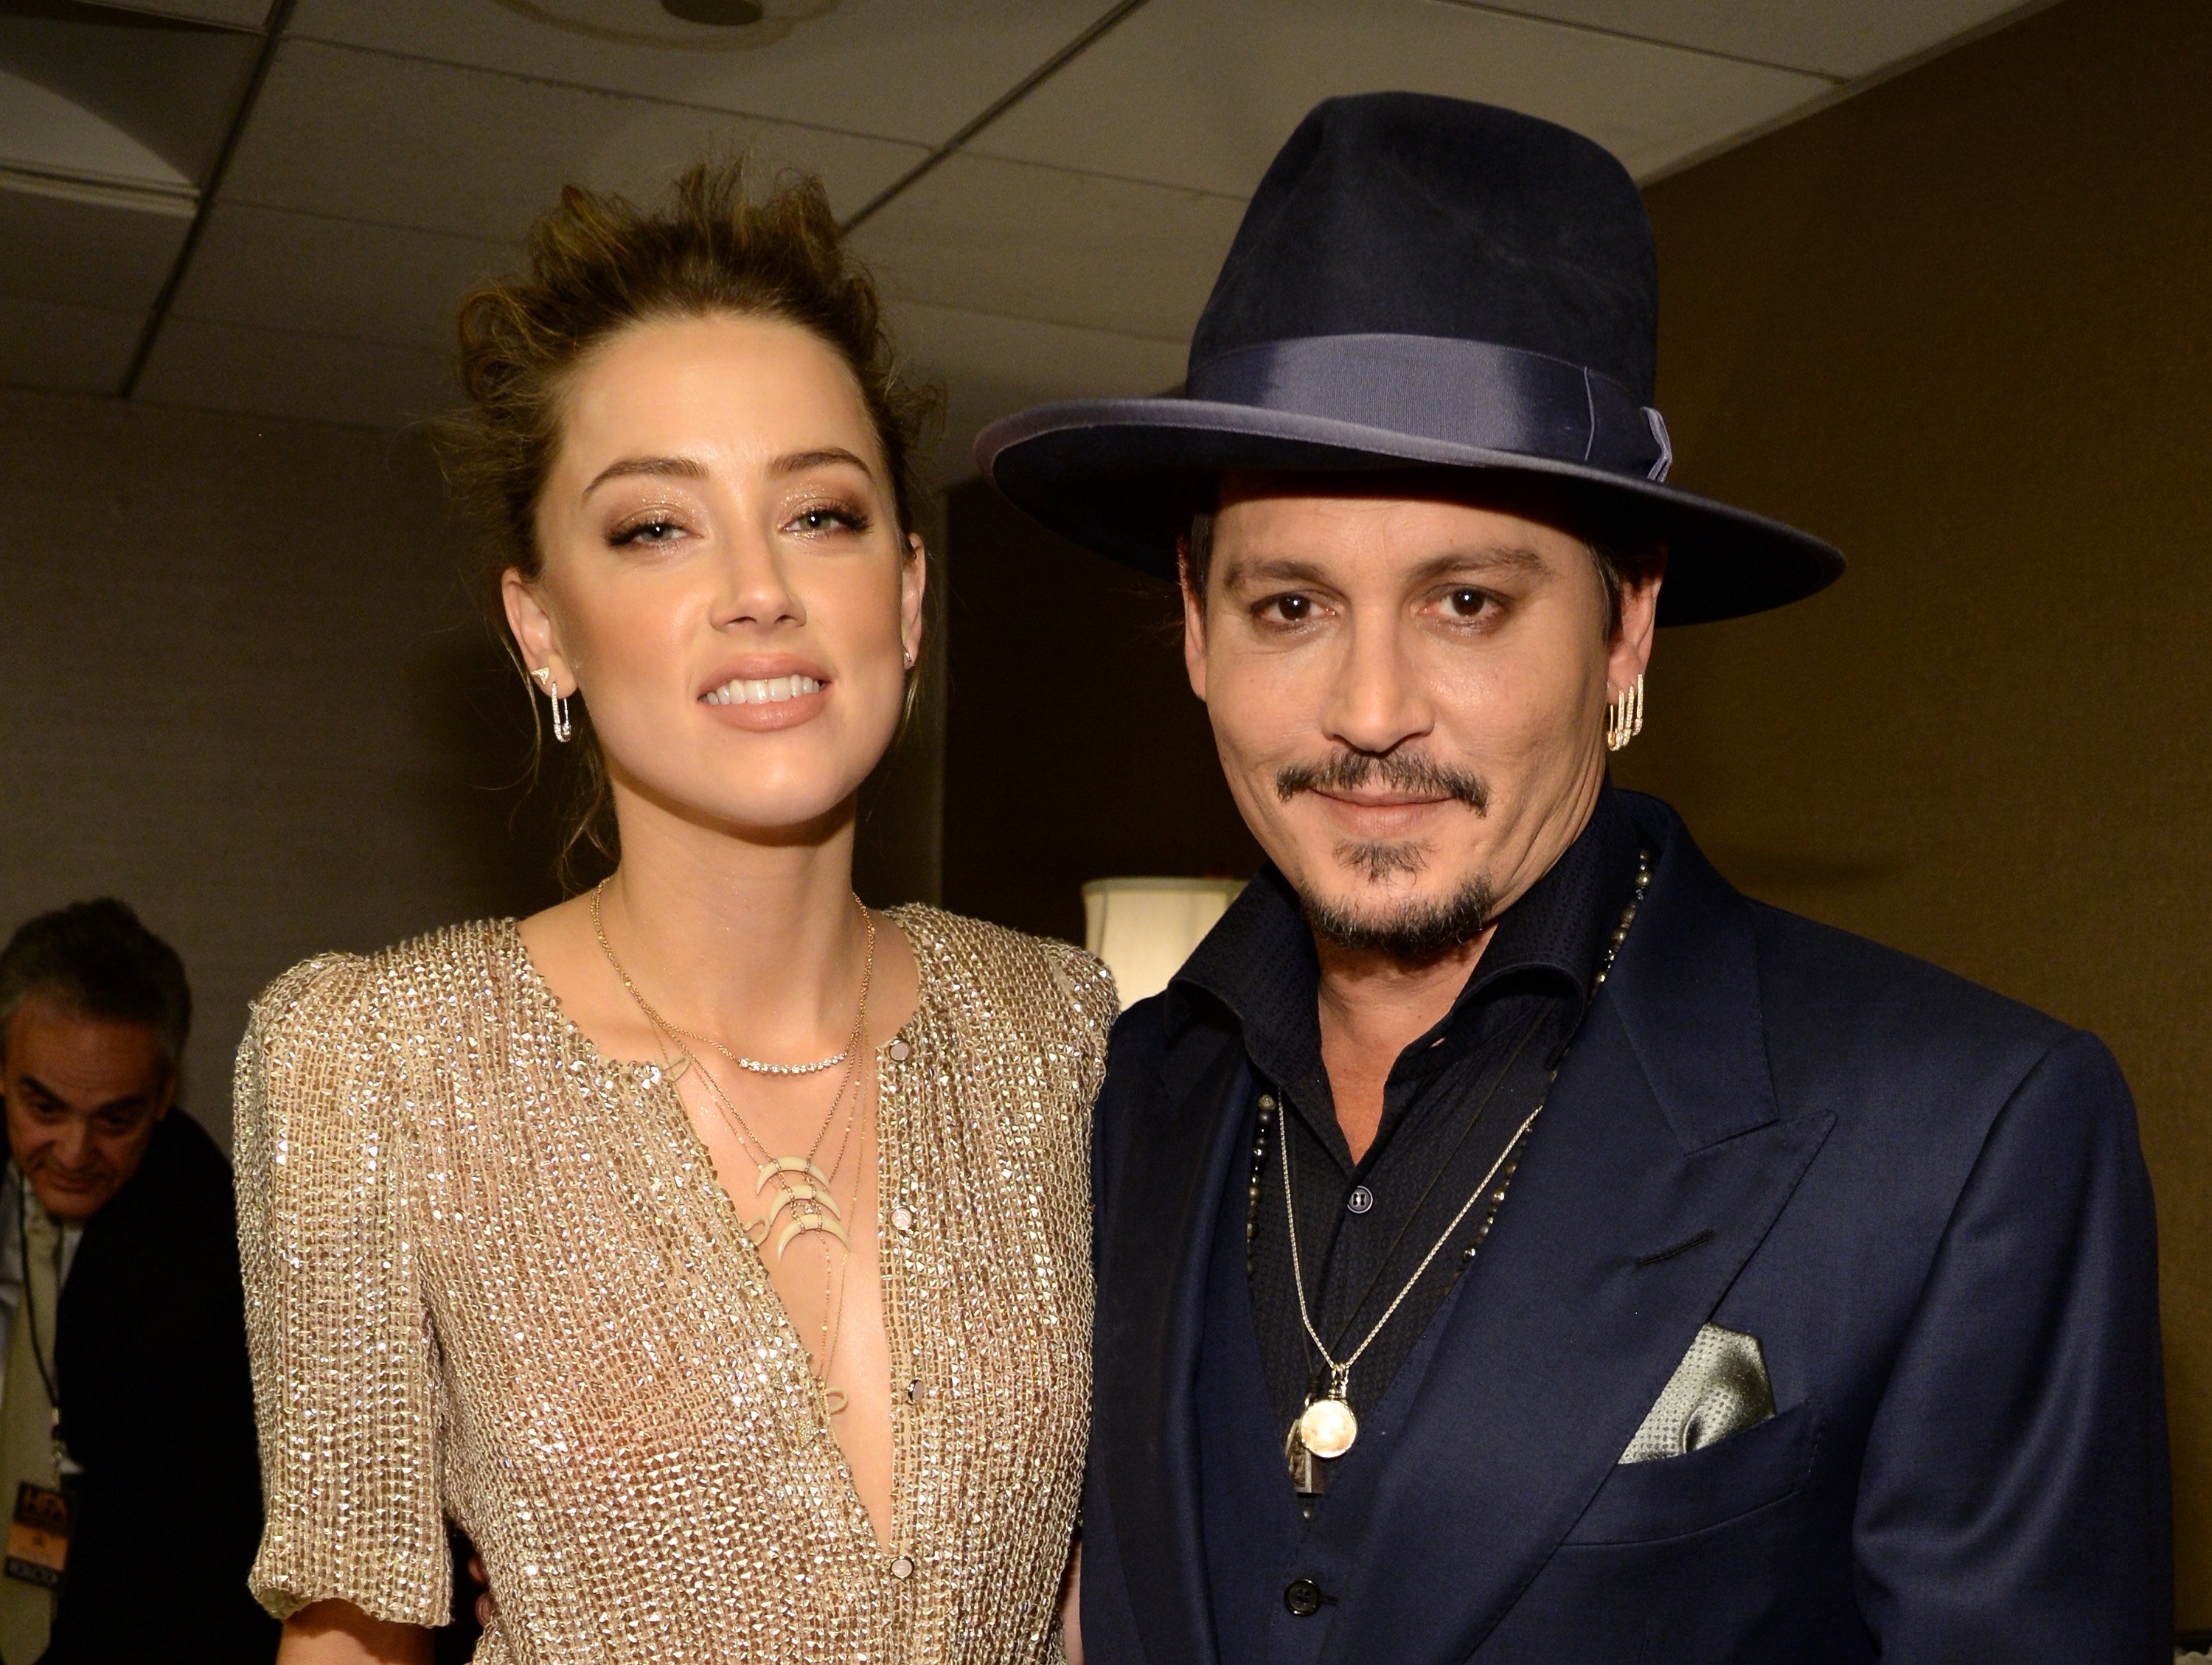 Amber Heard and Johnny Depp during the 19th Annual Hollywood Film Awards at The Beverly Hilton Hotel on November 1, 2015 in Beverly Hills, California. / Source: Getty Images